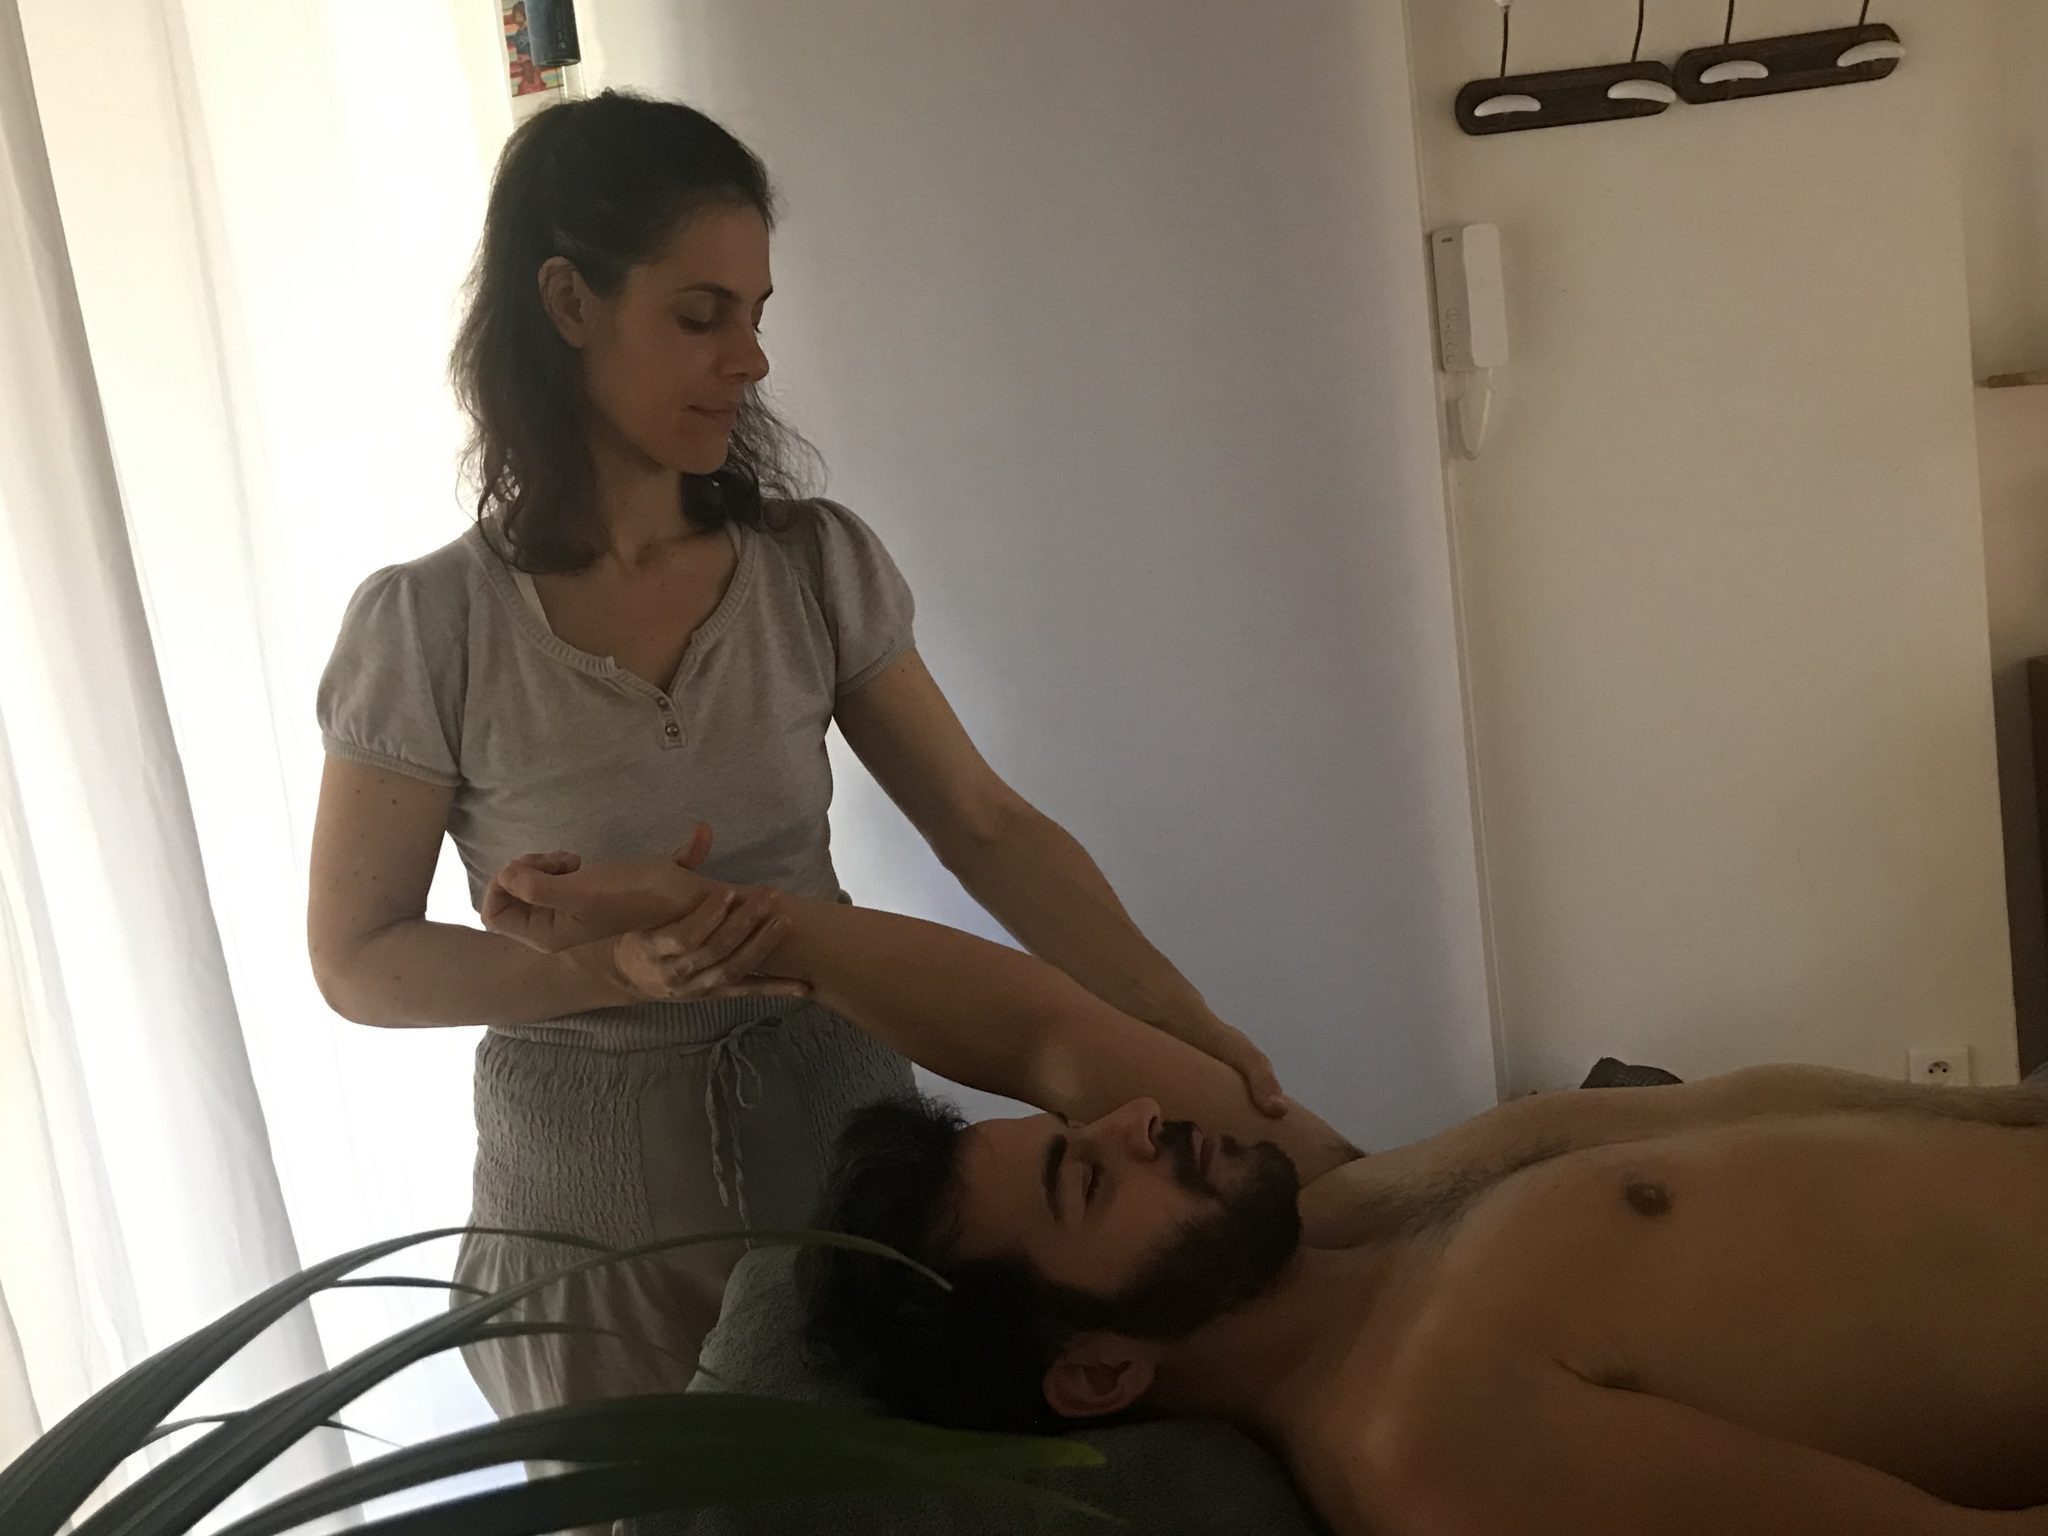 Massage corps complet huile chaude